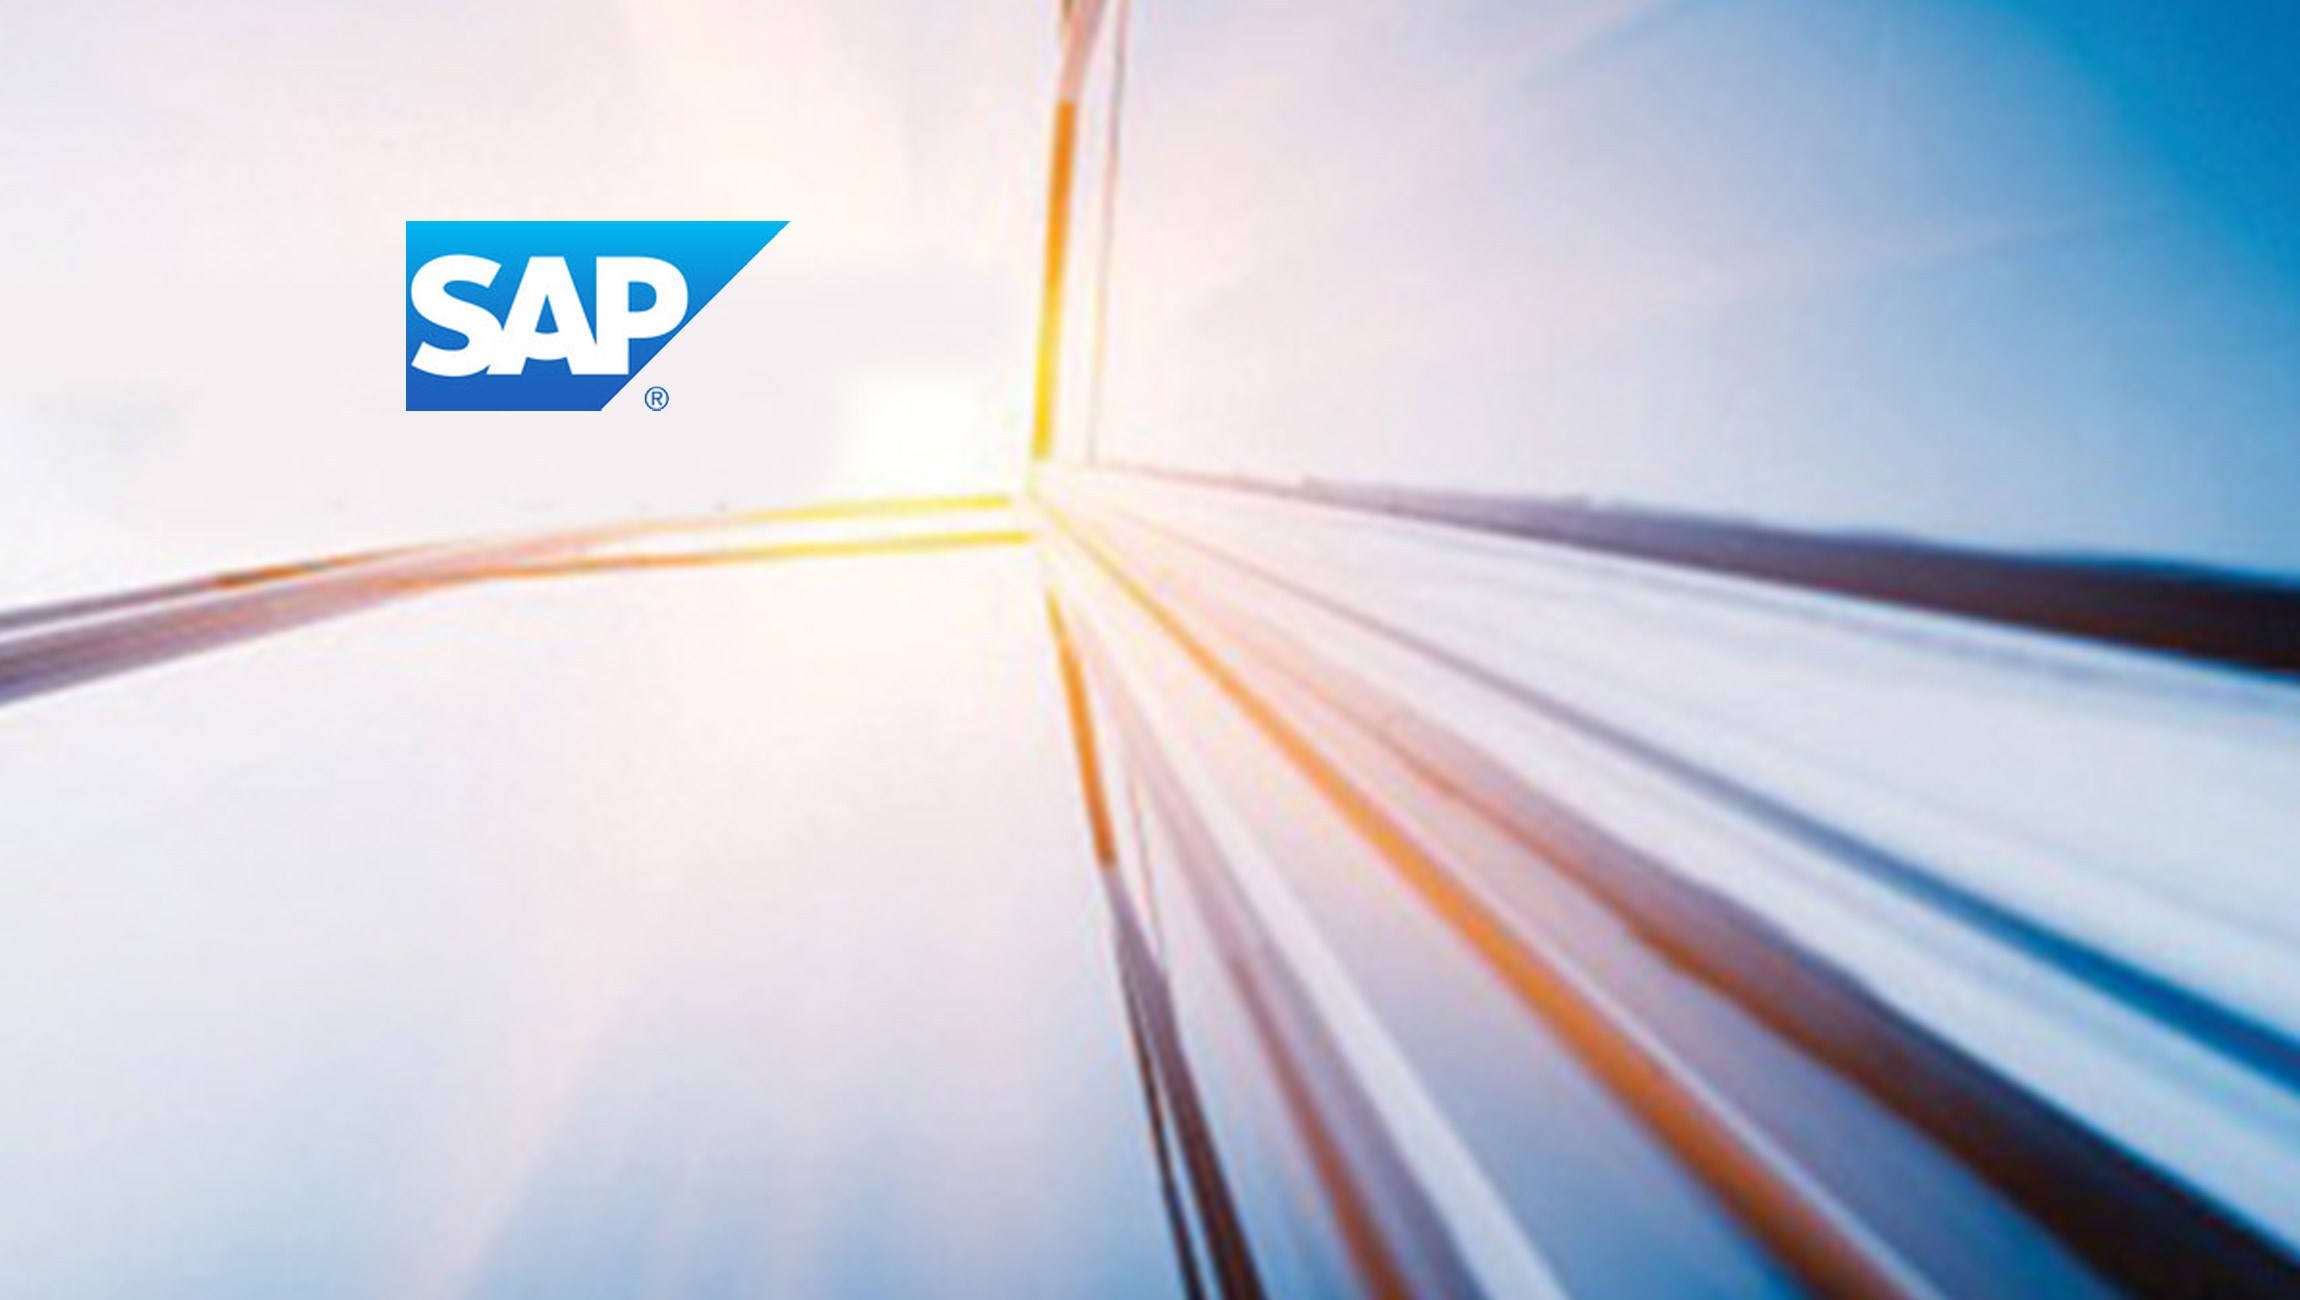 Companies Choose SAP to Help with Supply and Demand Volatility